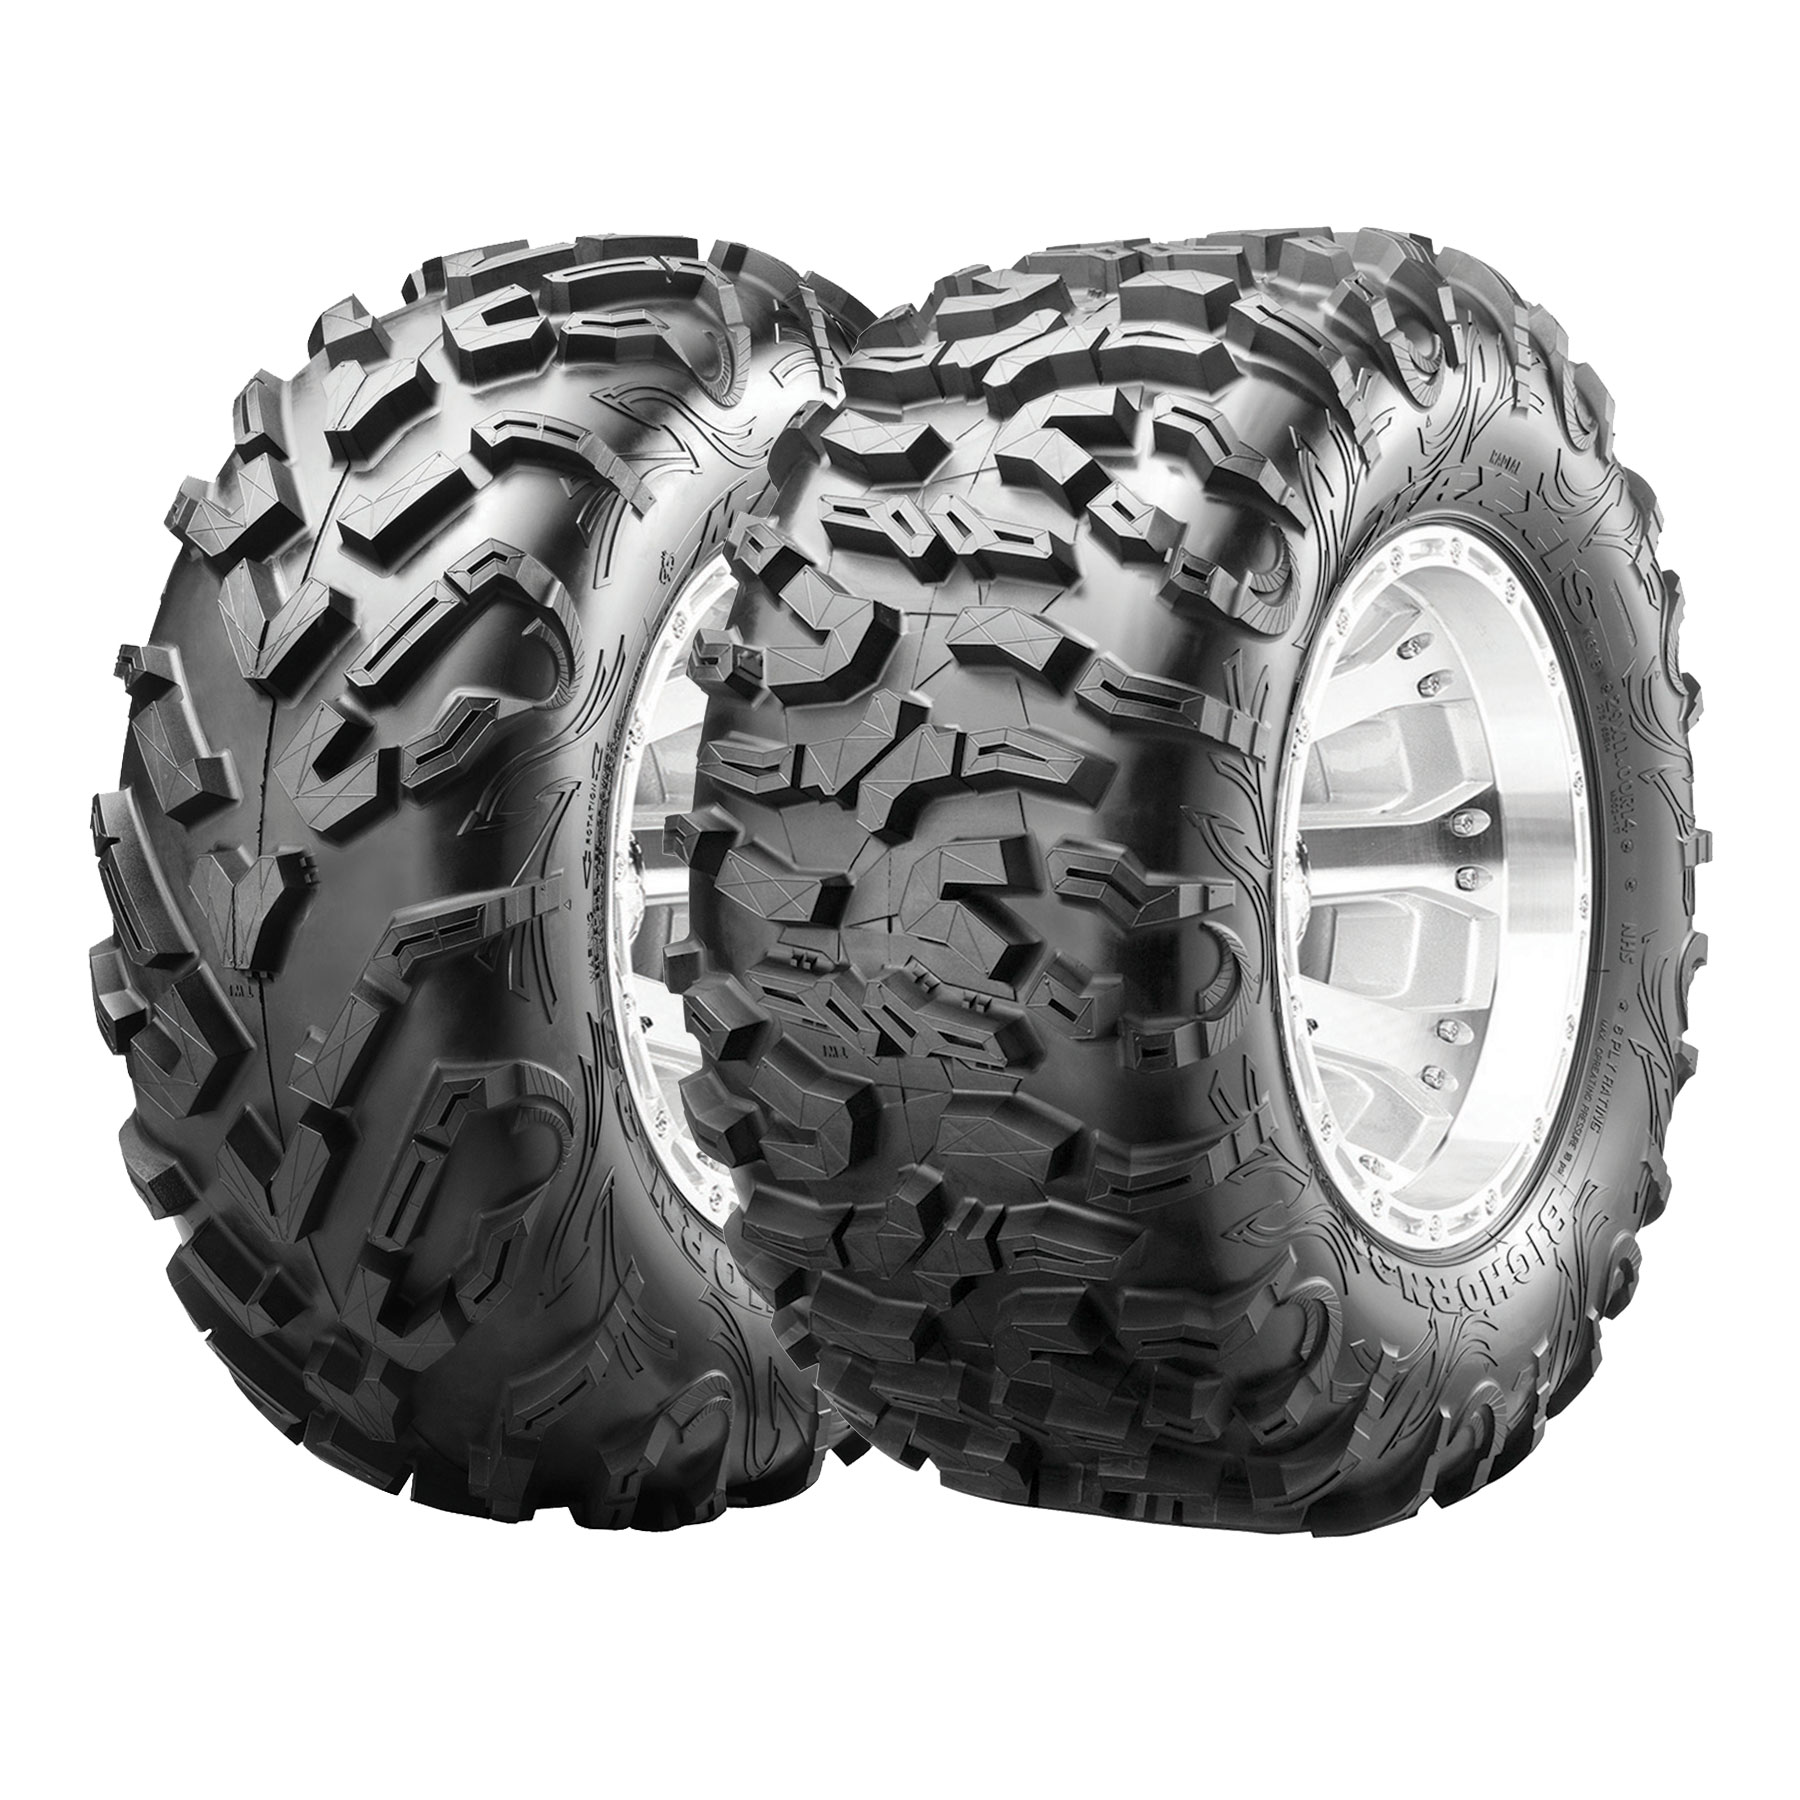 Maxxis TM00949100 Bighorn 3.0 Radial Tire 26x11-12 For XC and Off-Road Racing